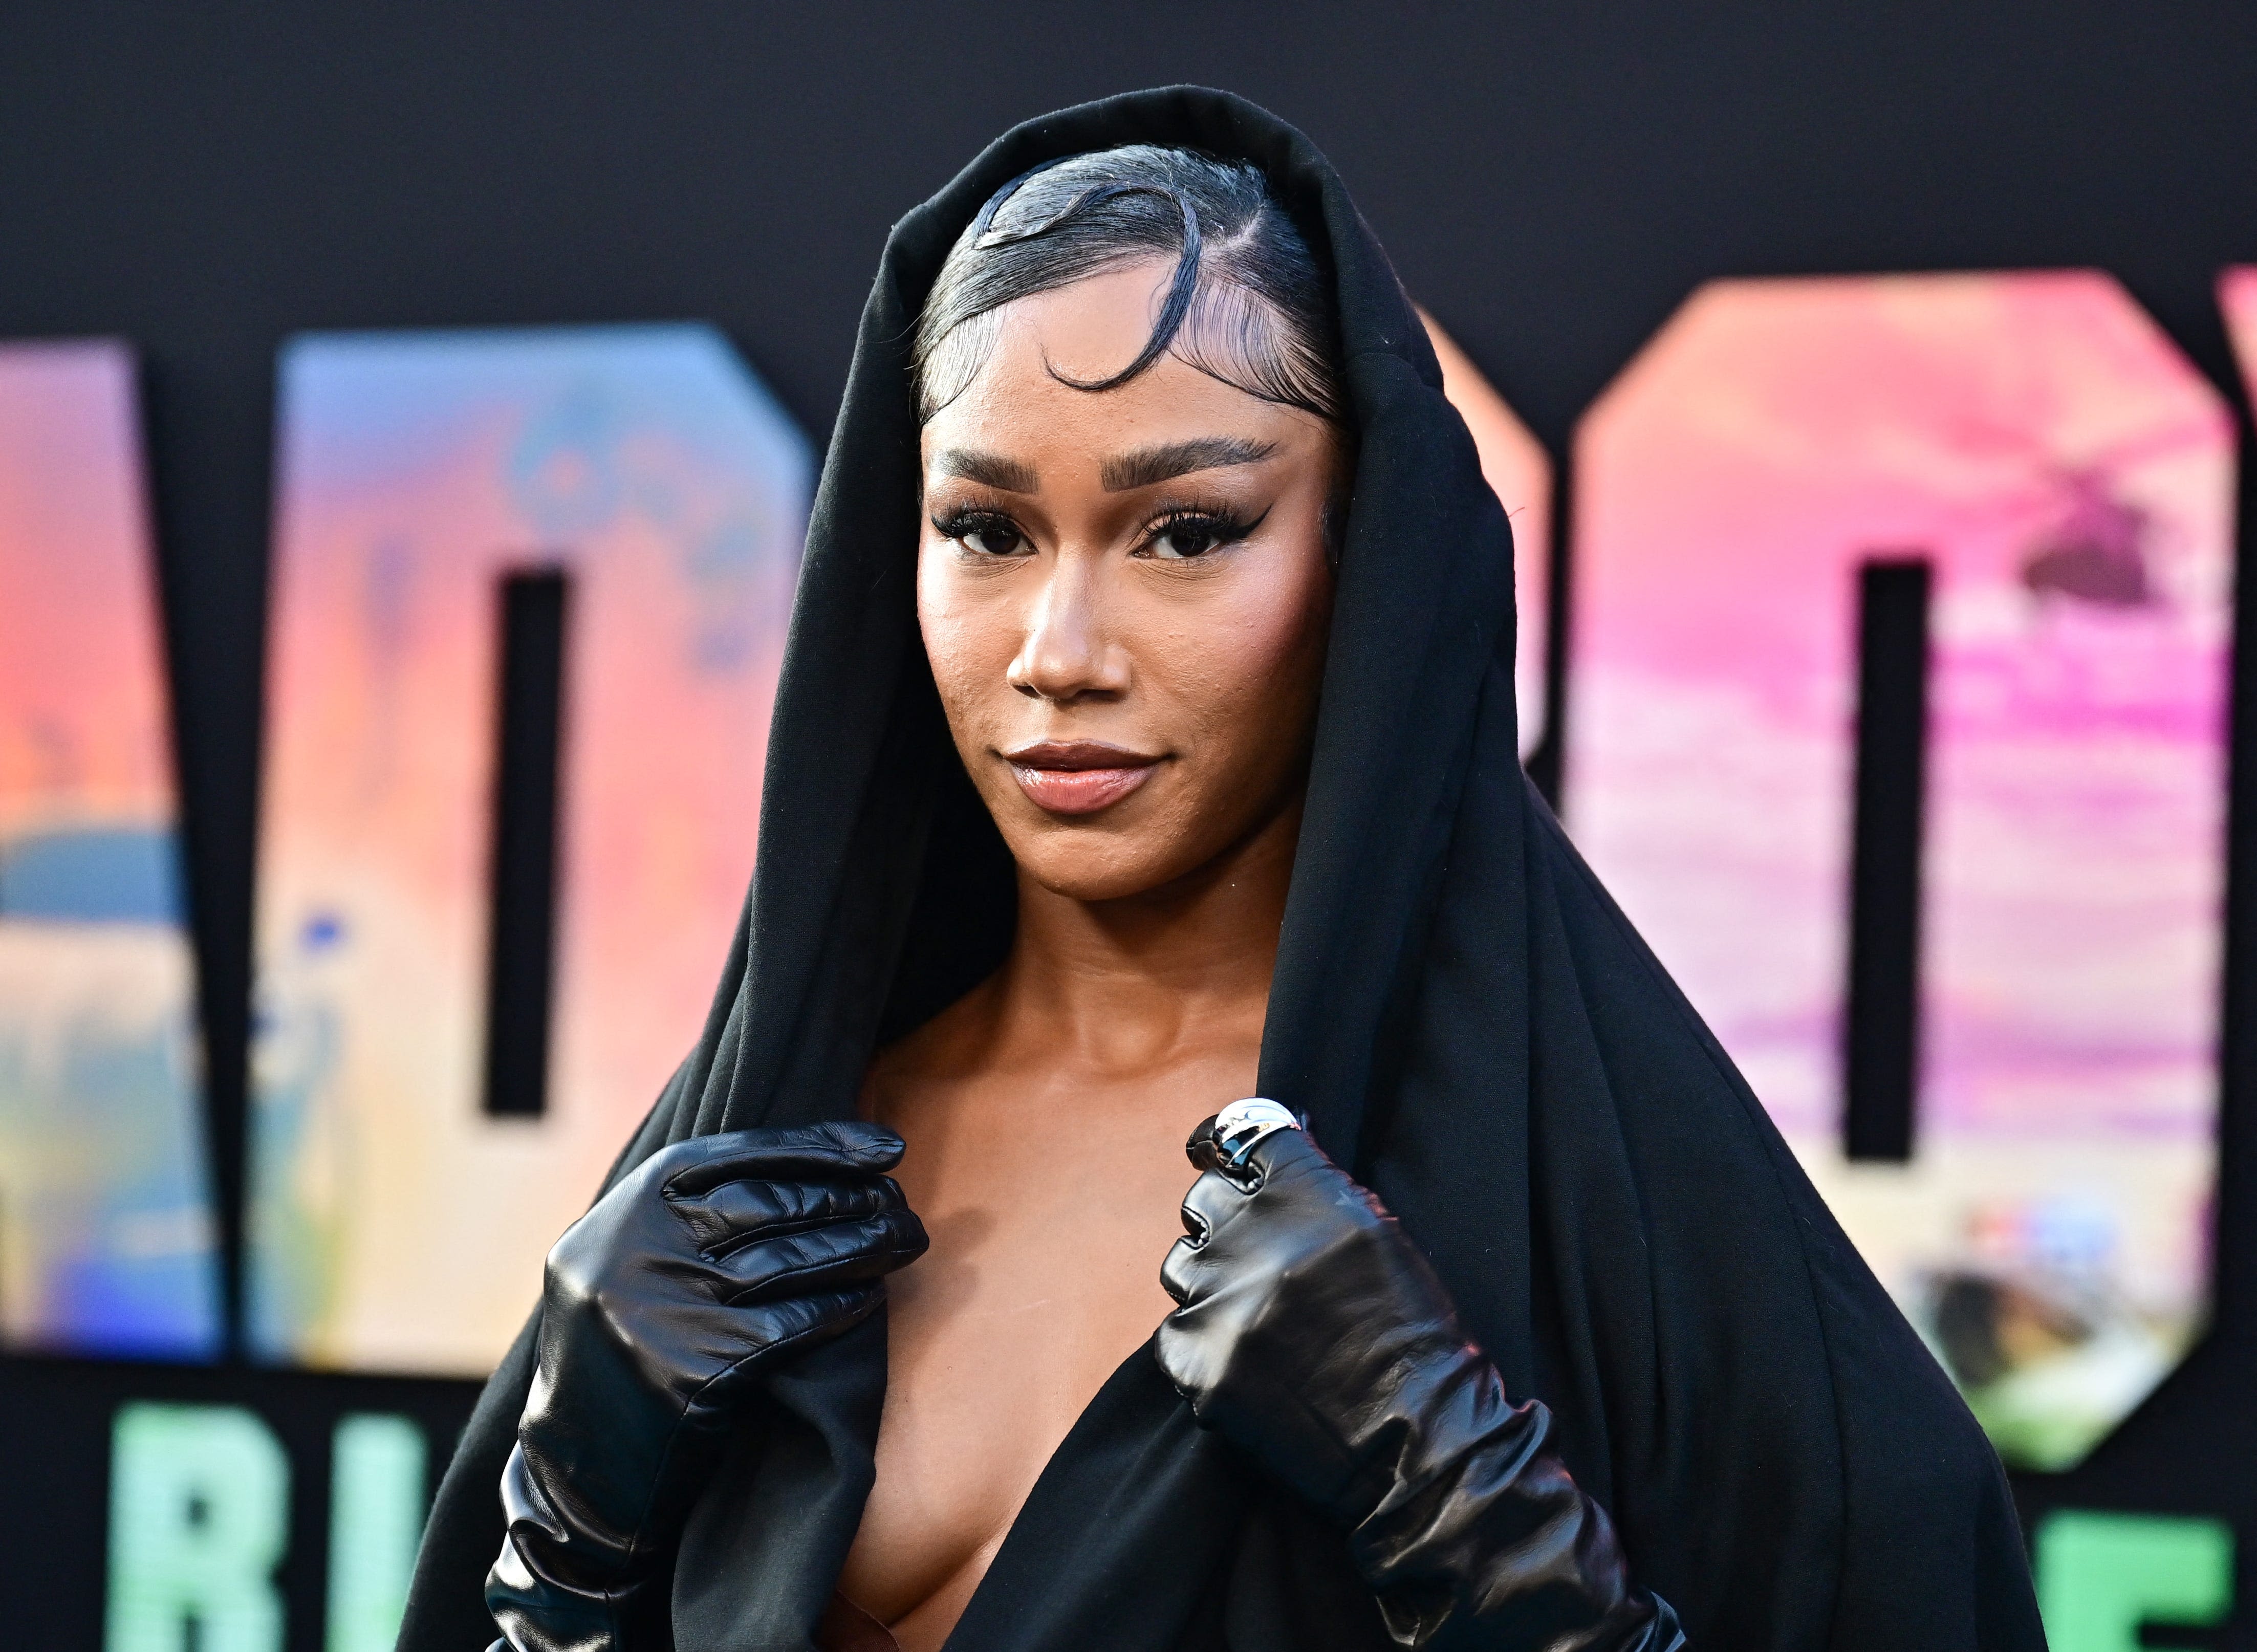 Bia previews Cardi B diss track after fellow rapper threatens to sue